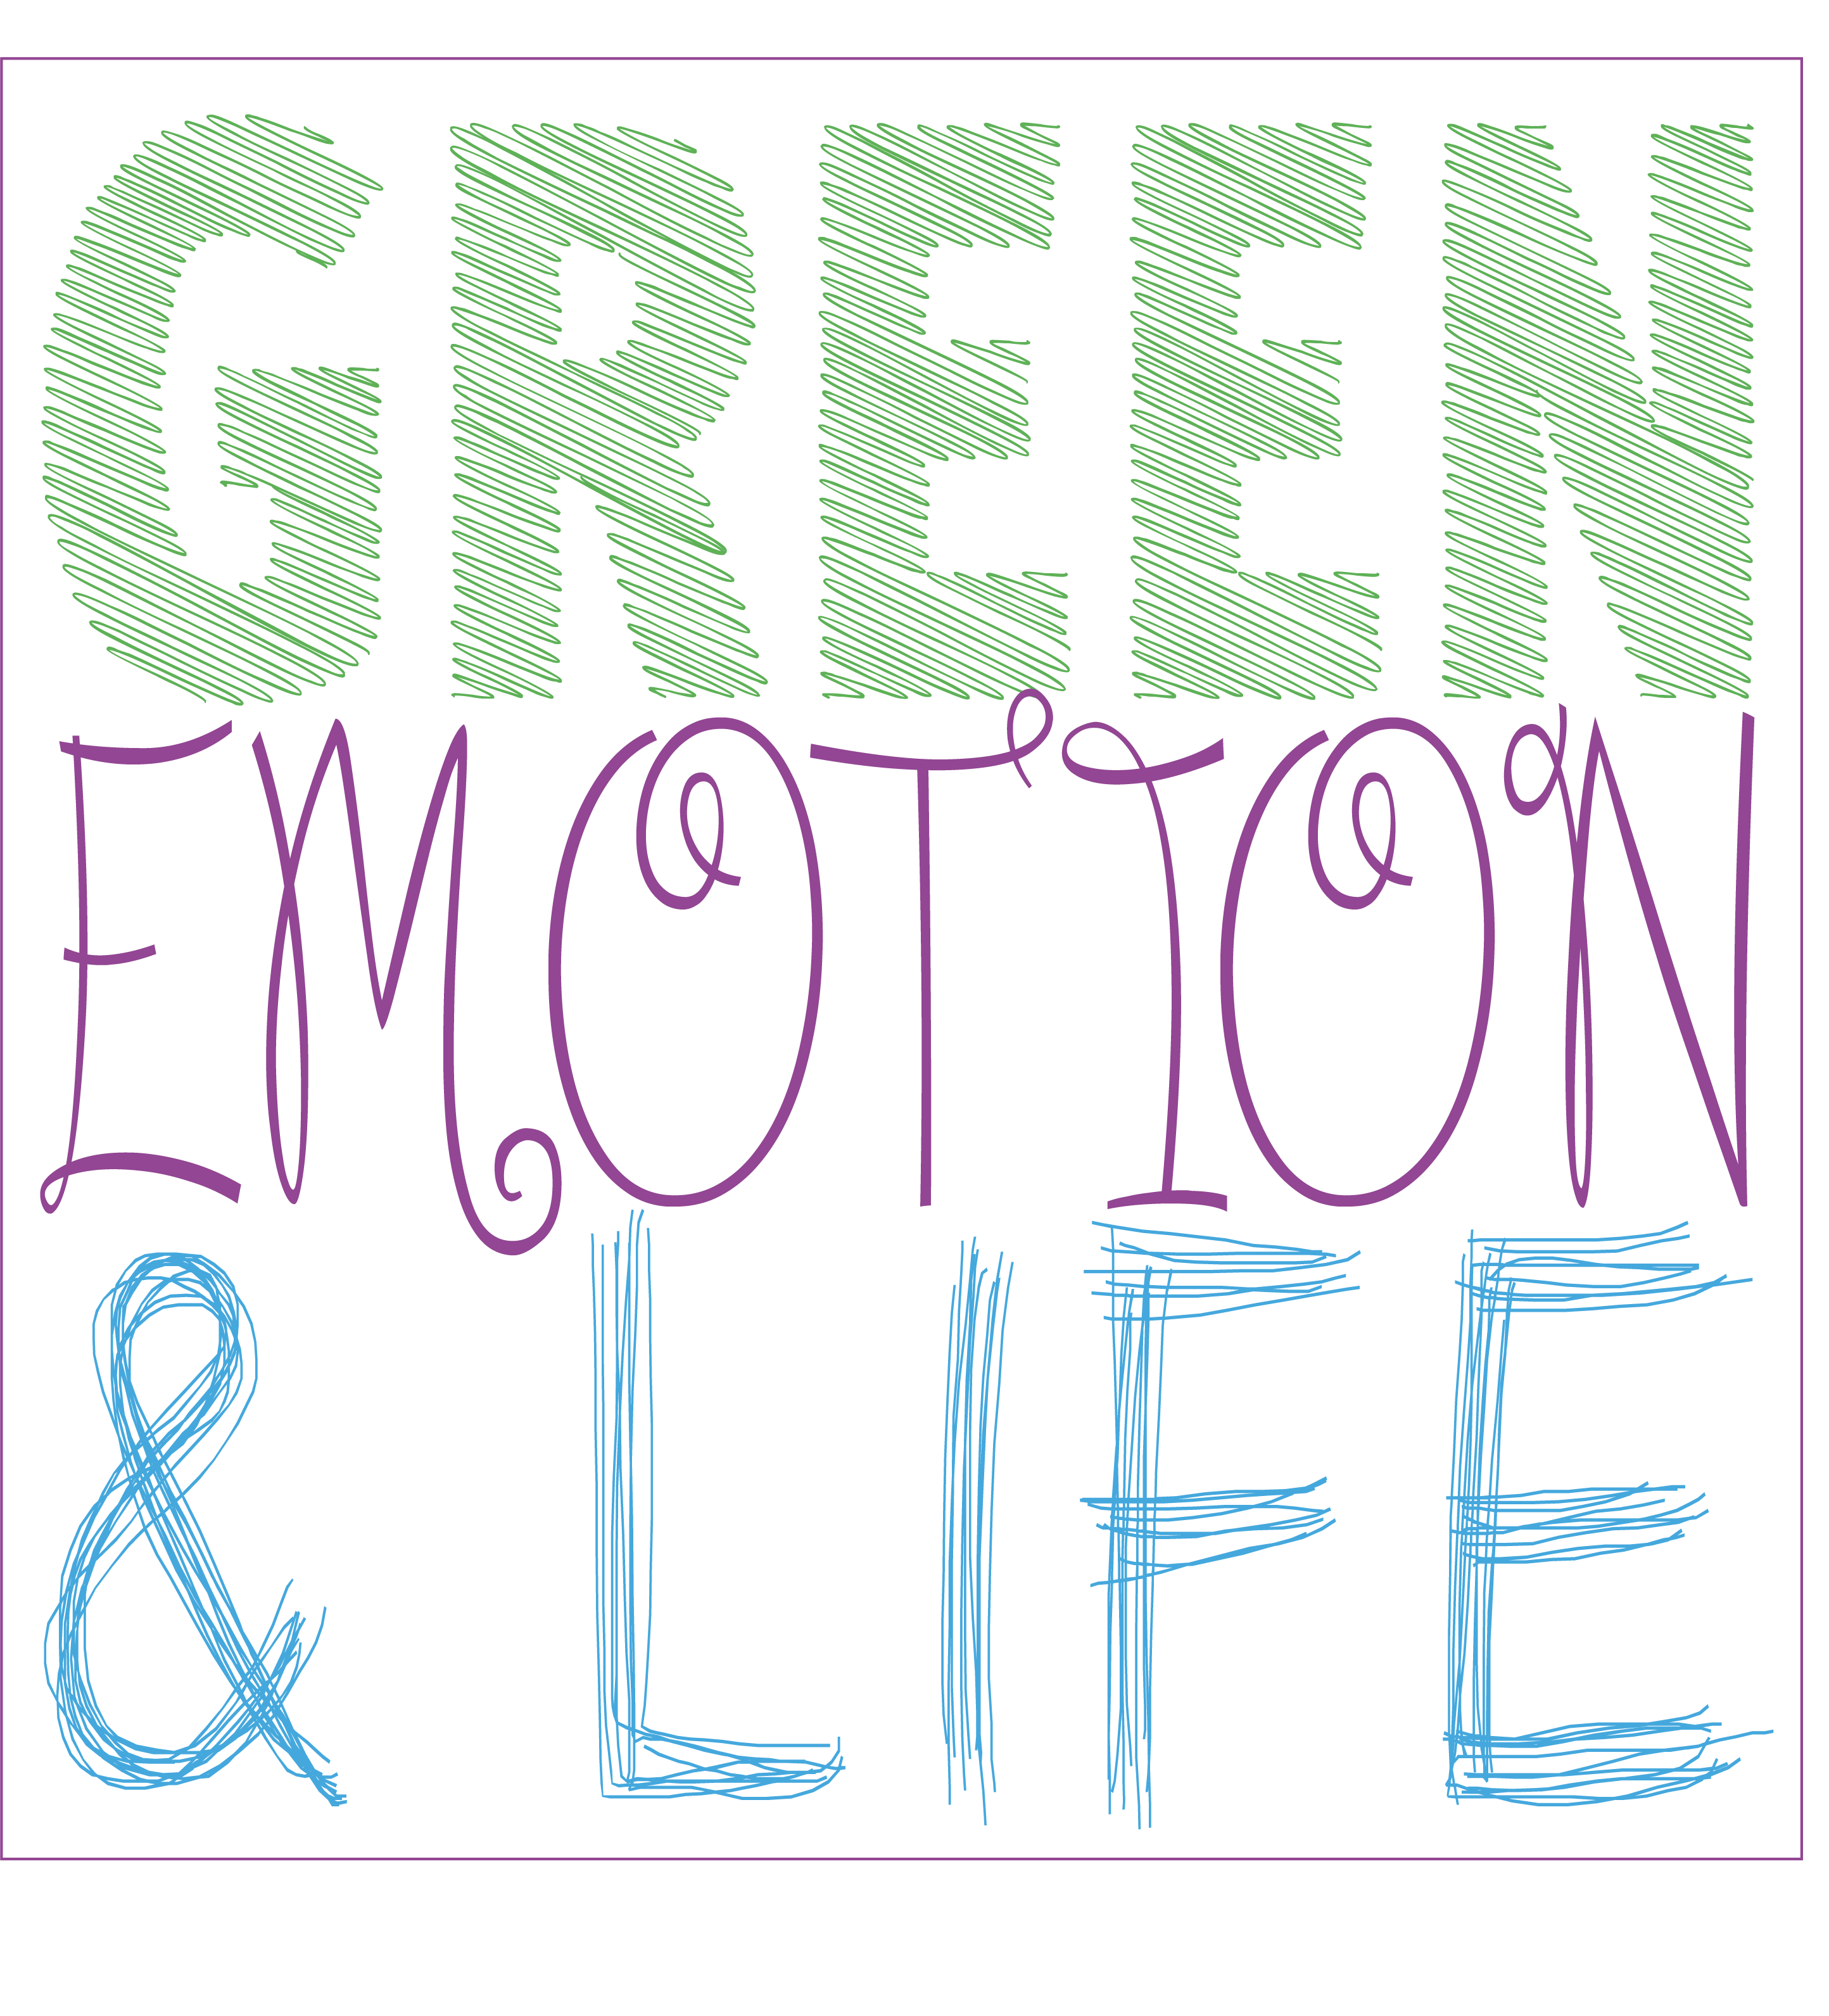 Green emotion and life